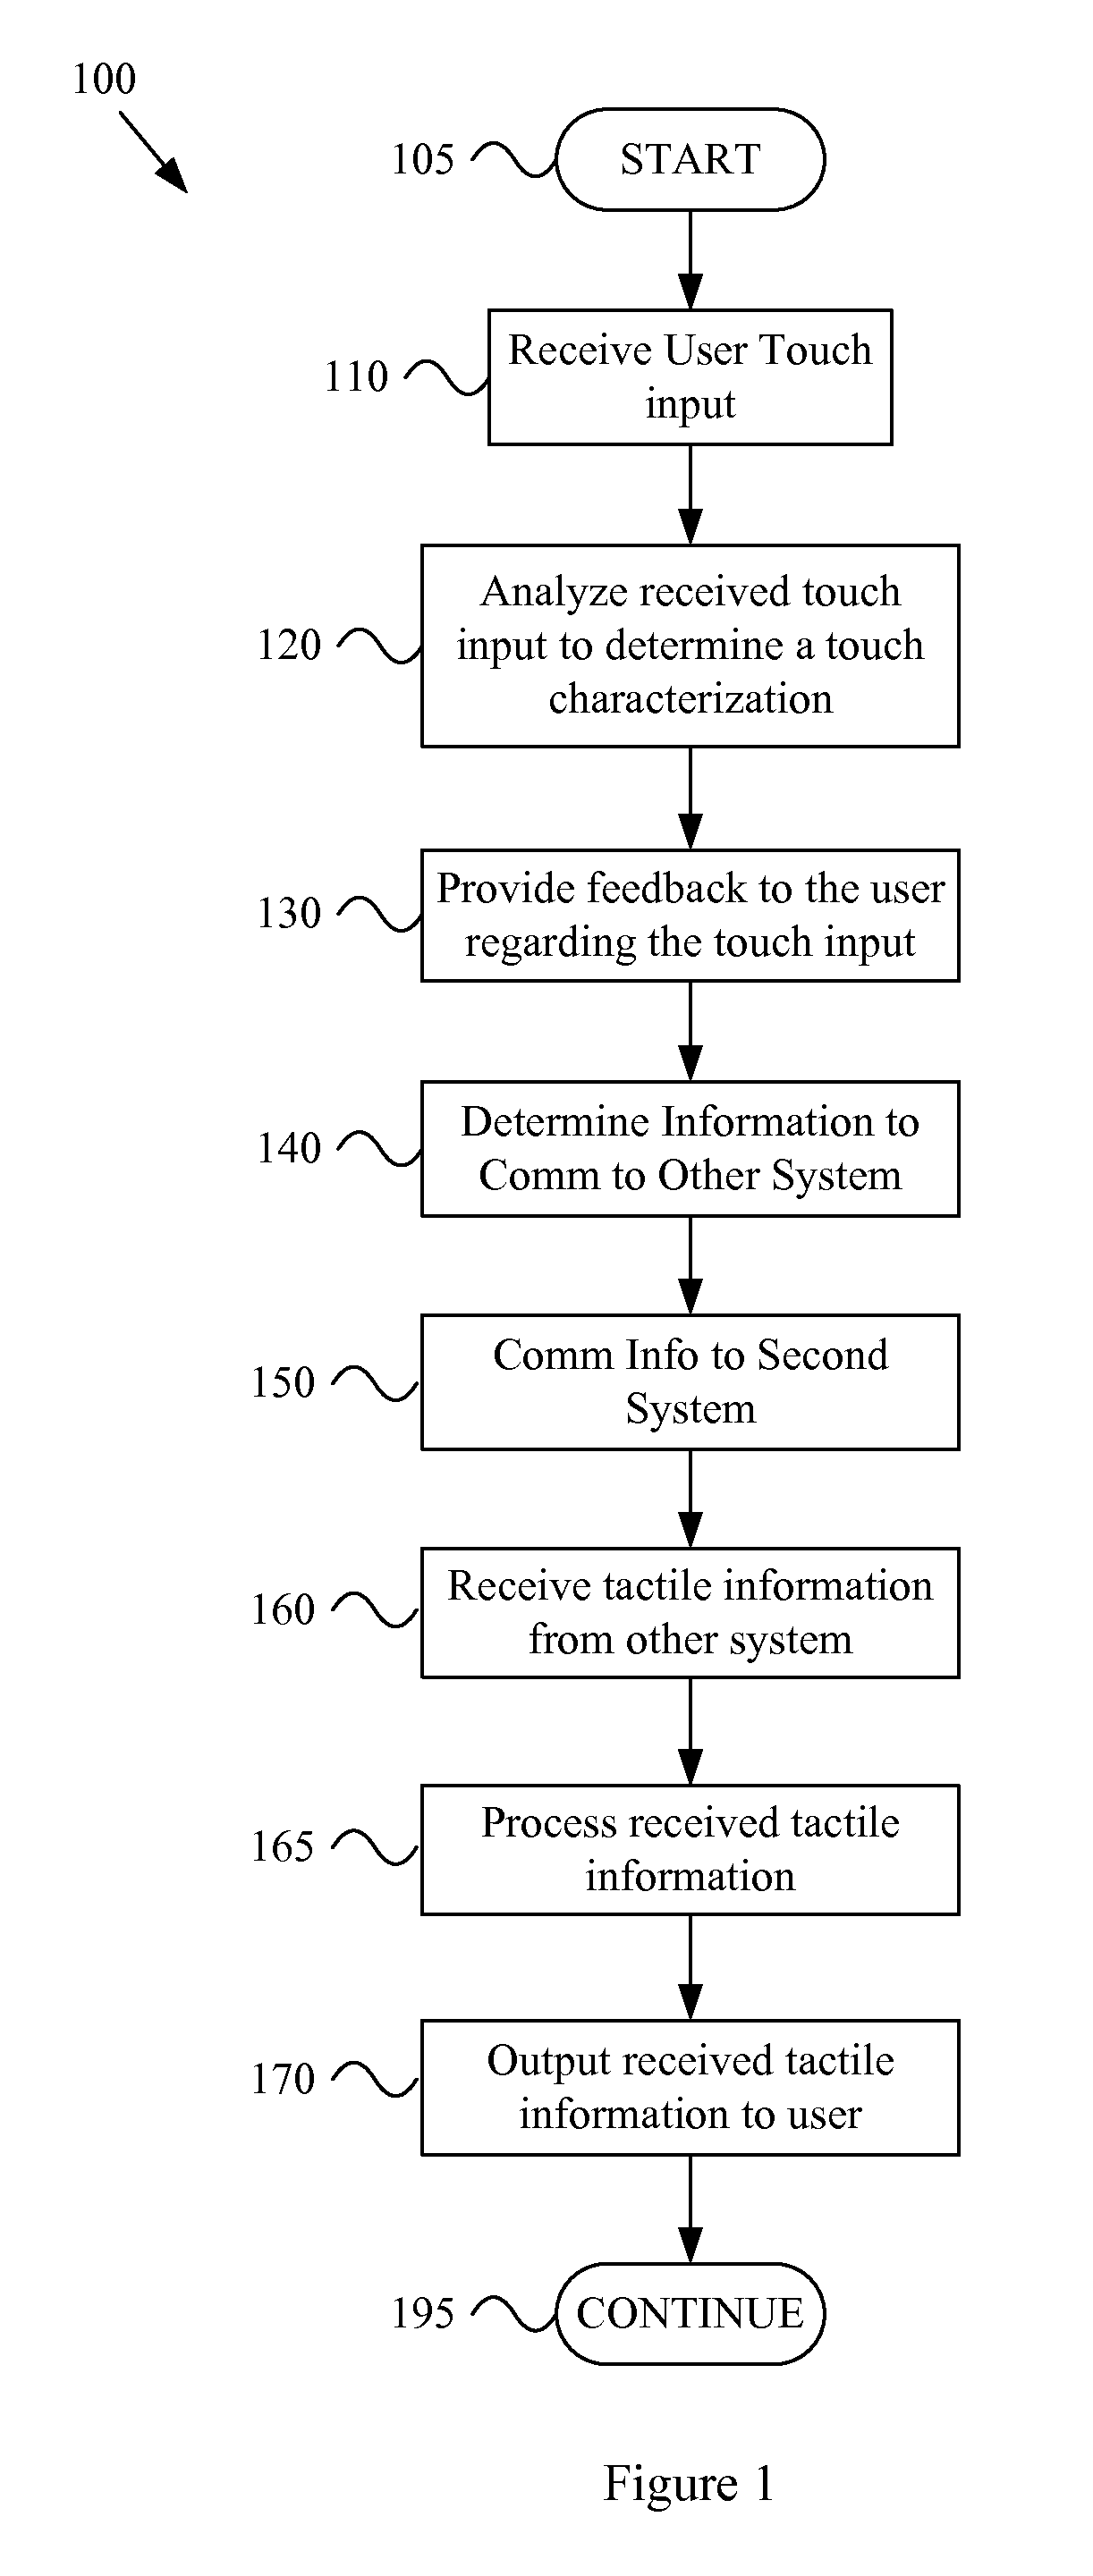 Tactile communication system with communications based on capabilities of a remote system